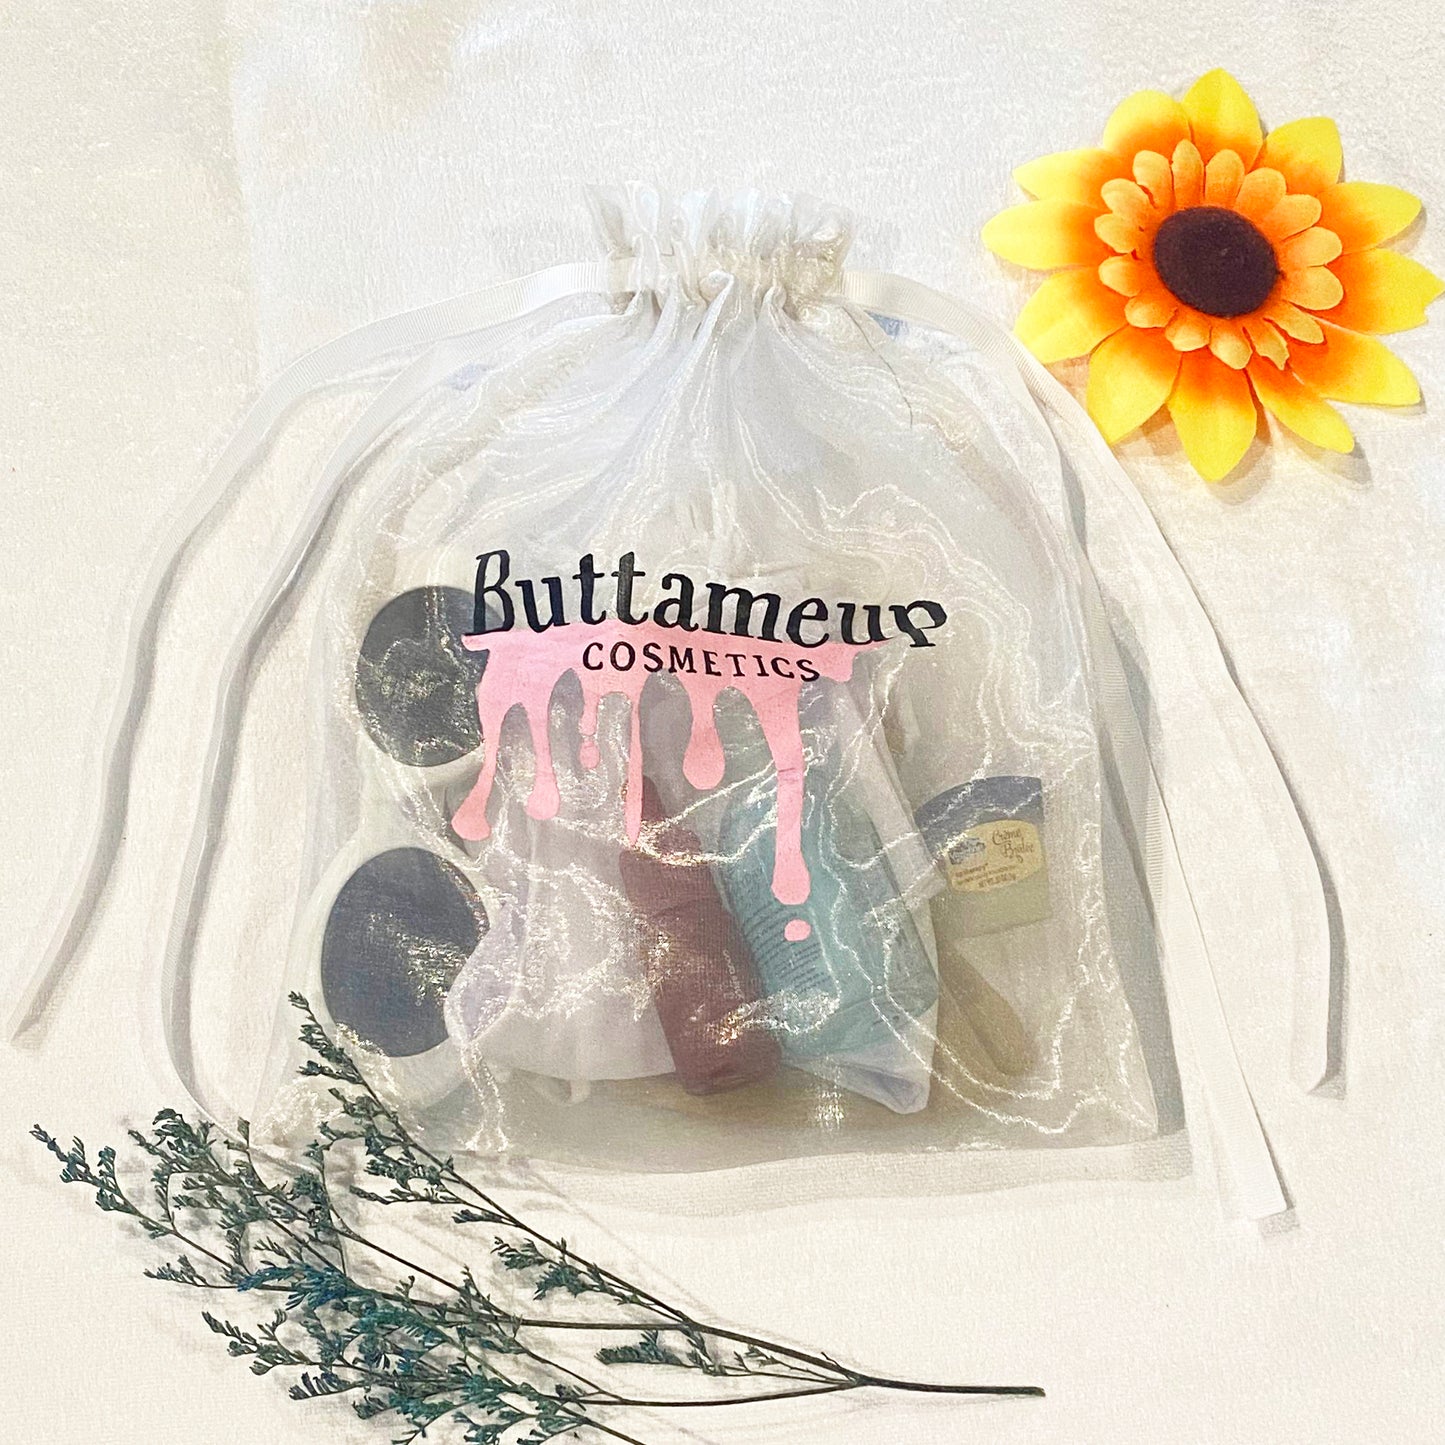 Organza Bag bulk 12x15 inch (30x38cm) Custom Printed with your logo for Wedding Guest favor Gift bags, Cosmetic bag, Goodie pouch